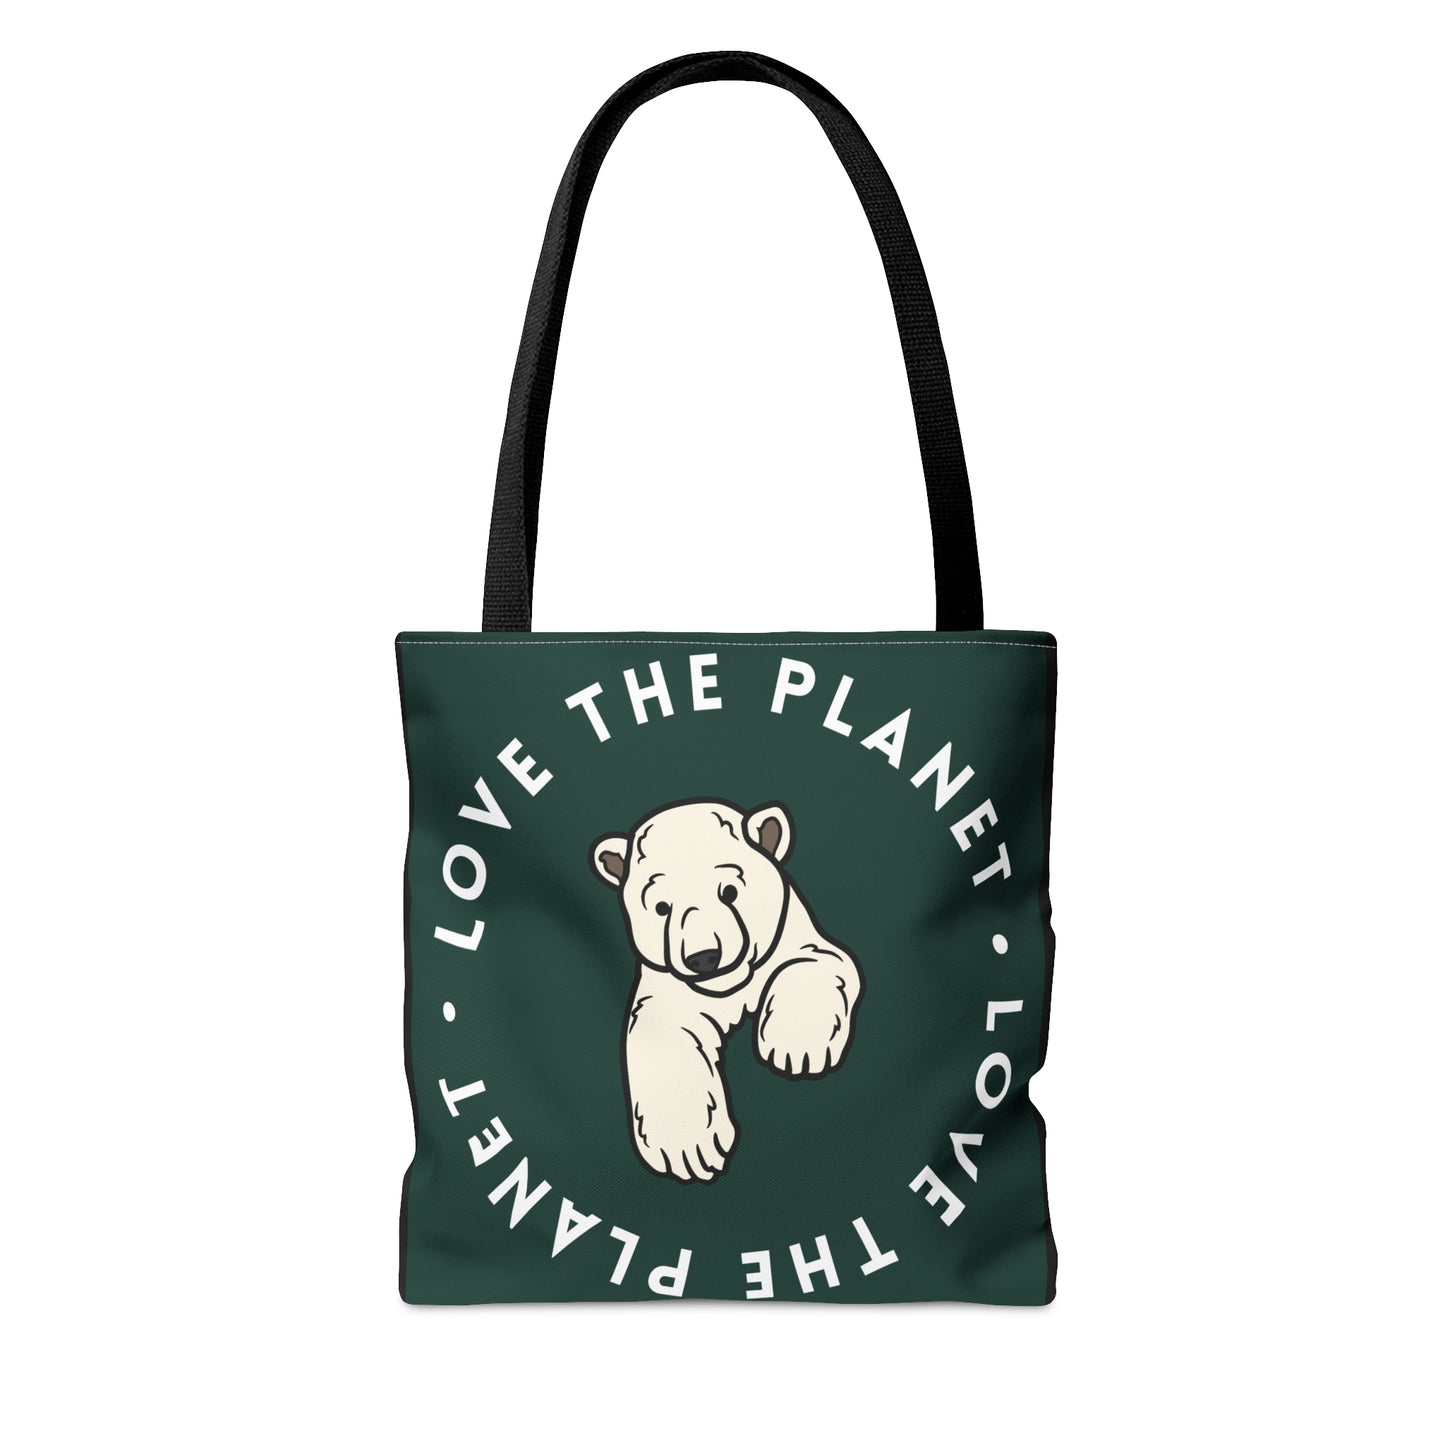 Polar bear inside a  “LOVE THE PLANET” Tote Bag in 3 sizes to meet your needs. Available in black.